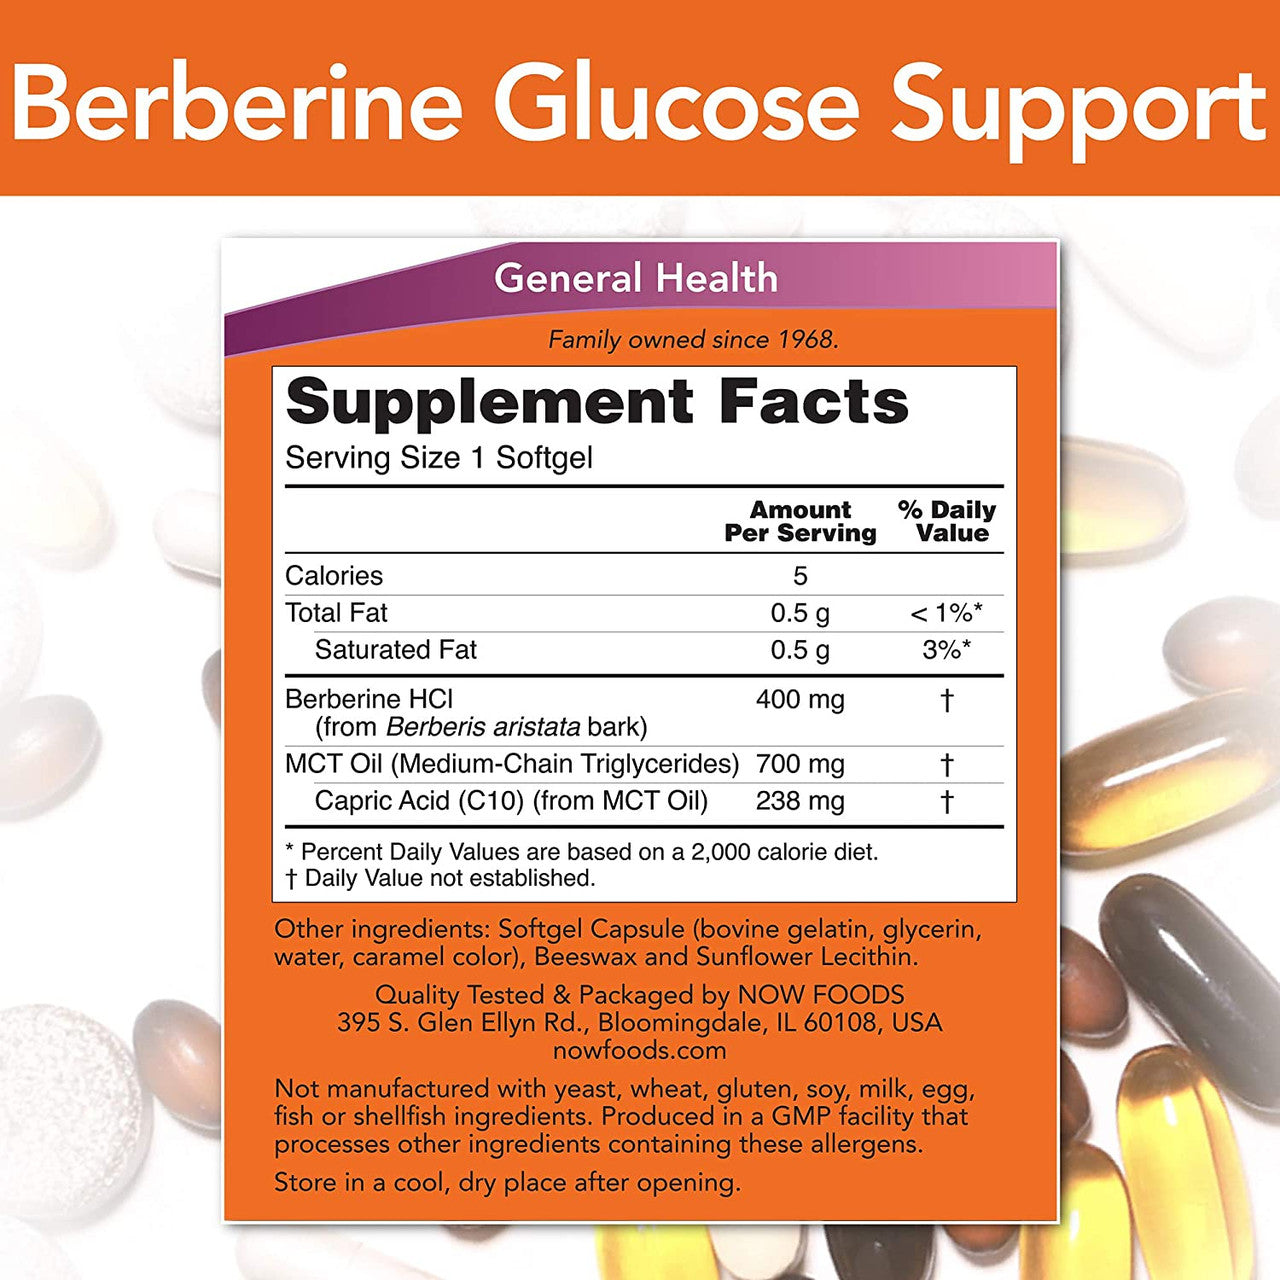 Now Berberine Glucose Support supplement facts